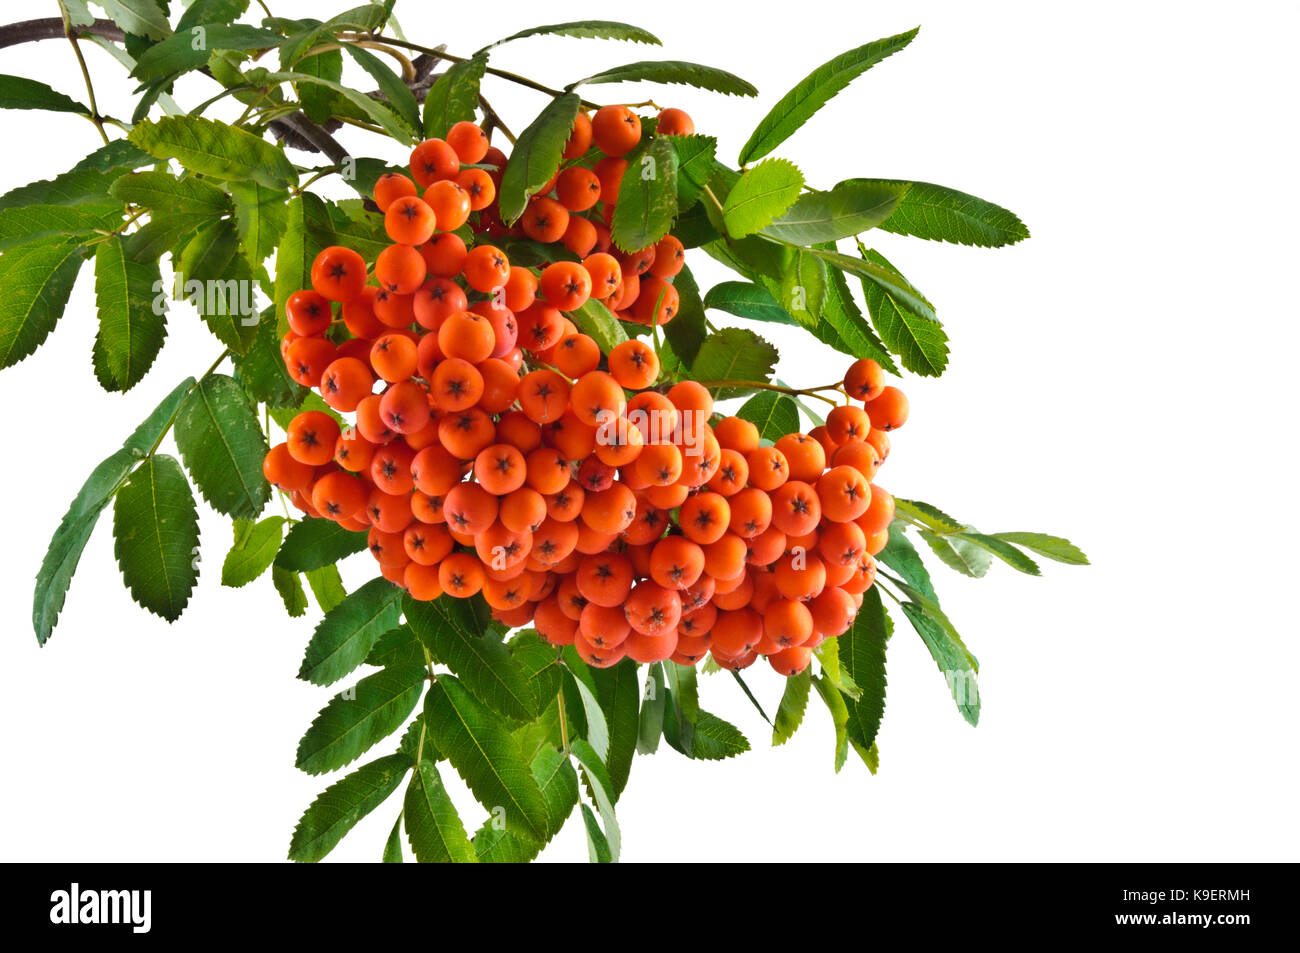 Twig with red rowan berries close-up isolated on white background. Stock Photo